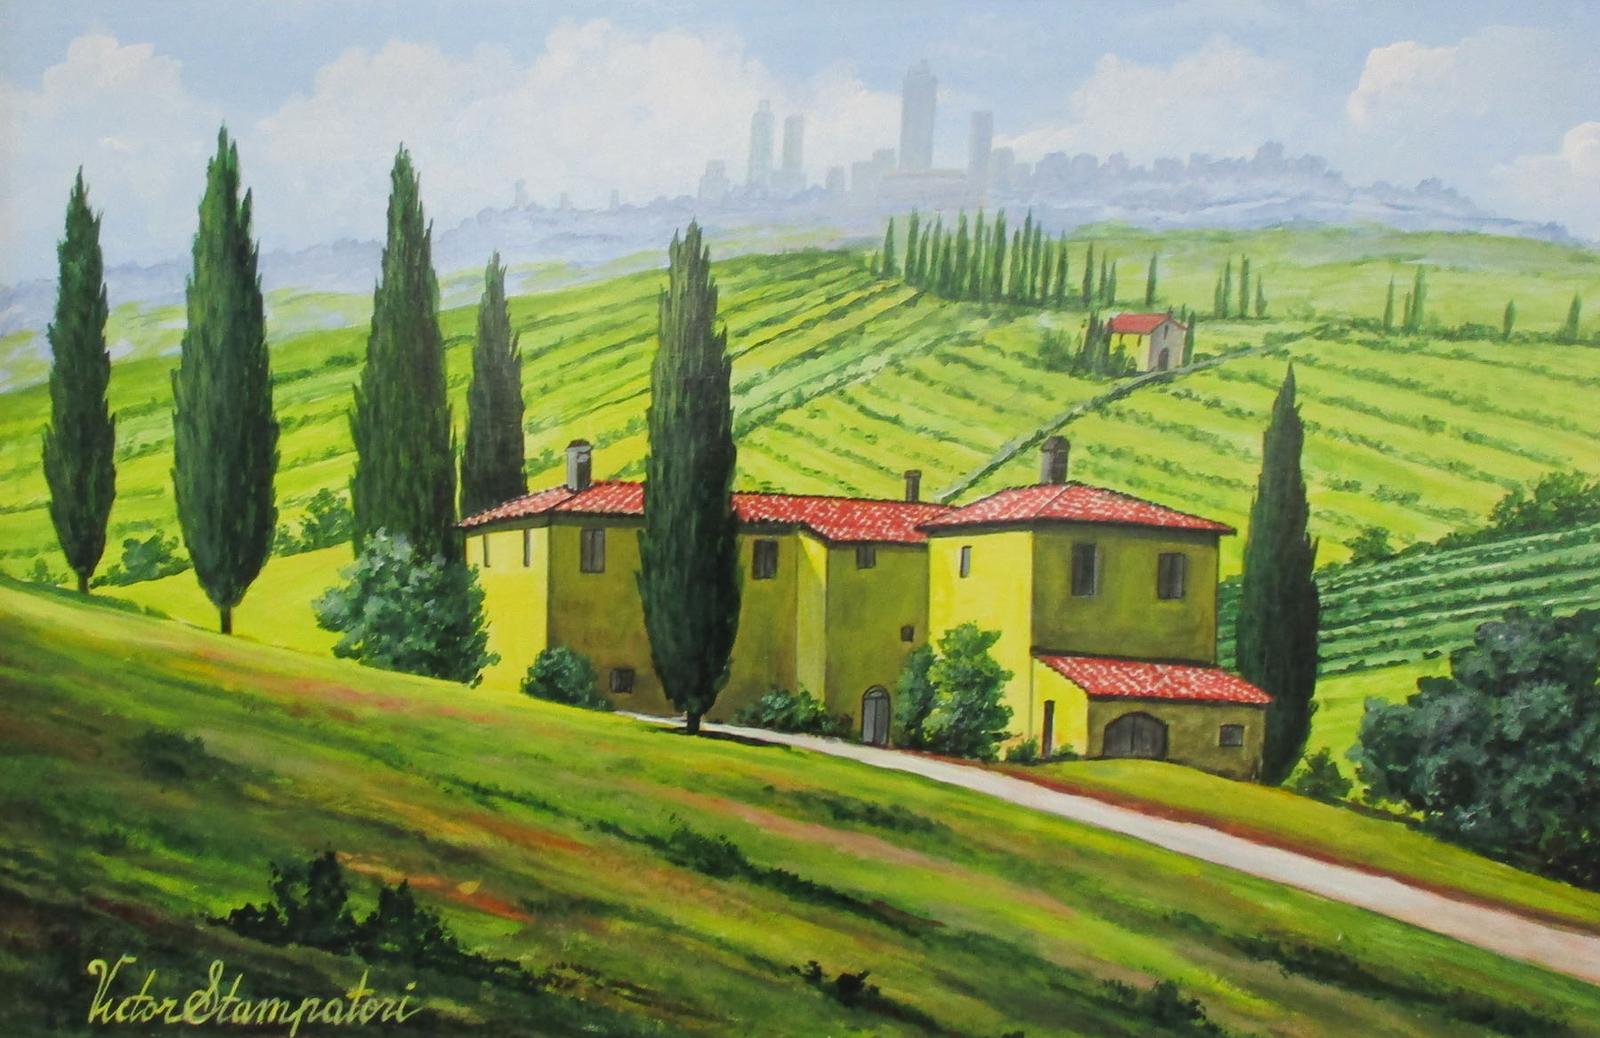 Victor Stampatori (1939) - Tuscan Town and Country